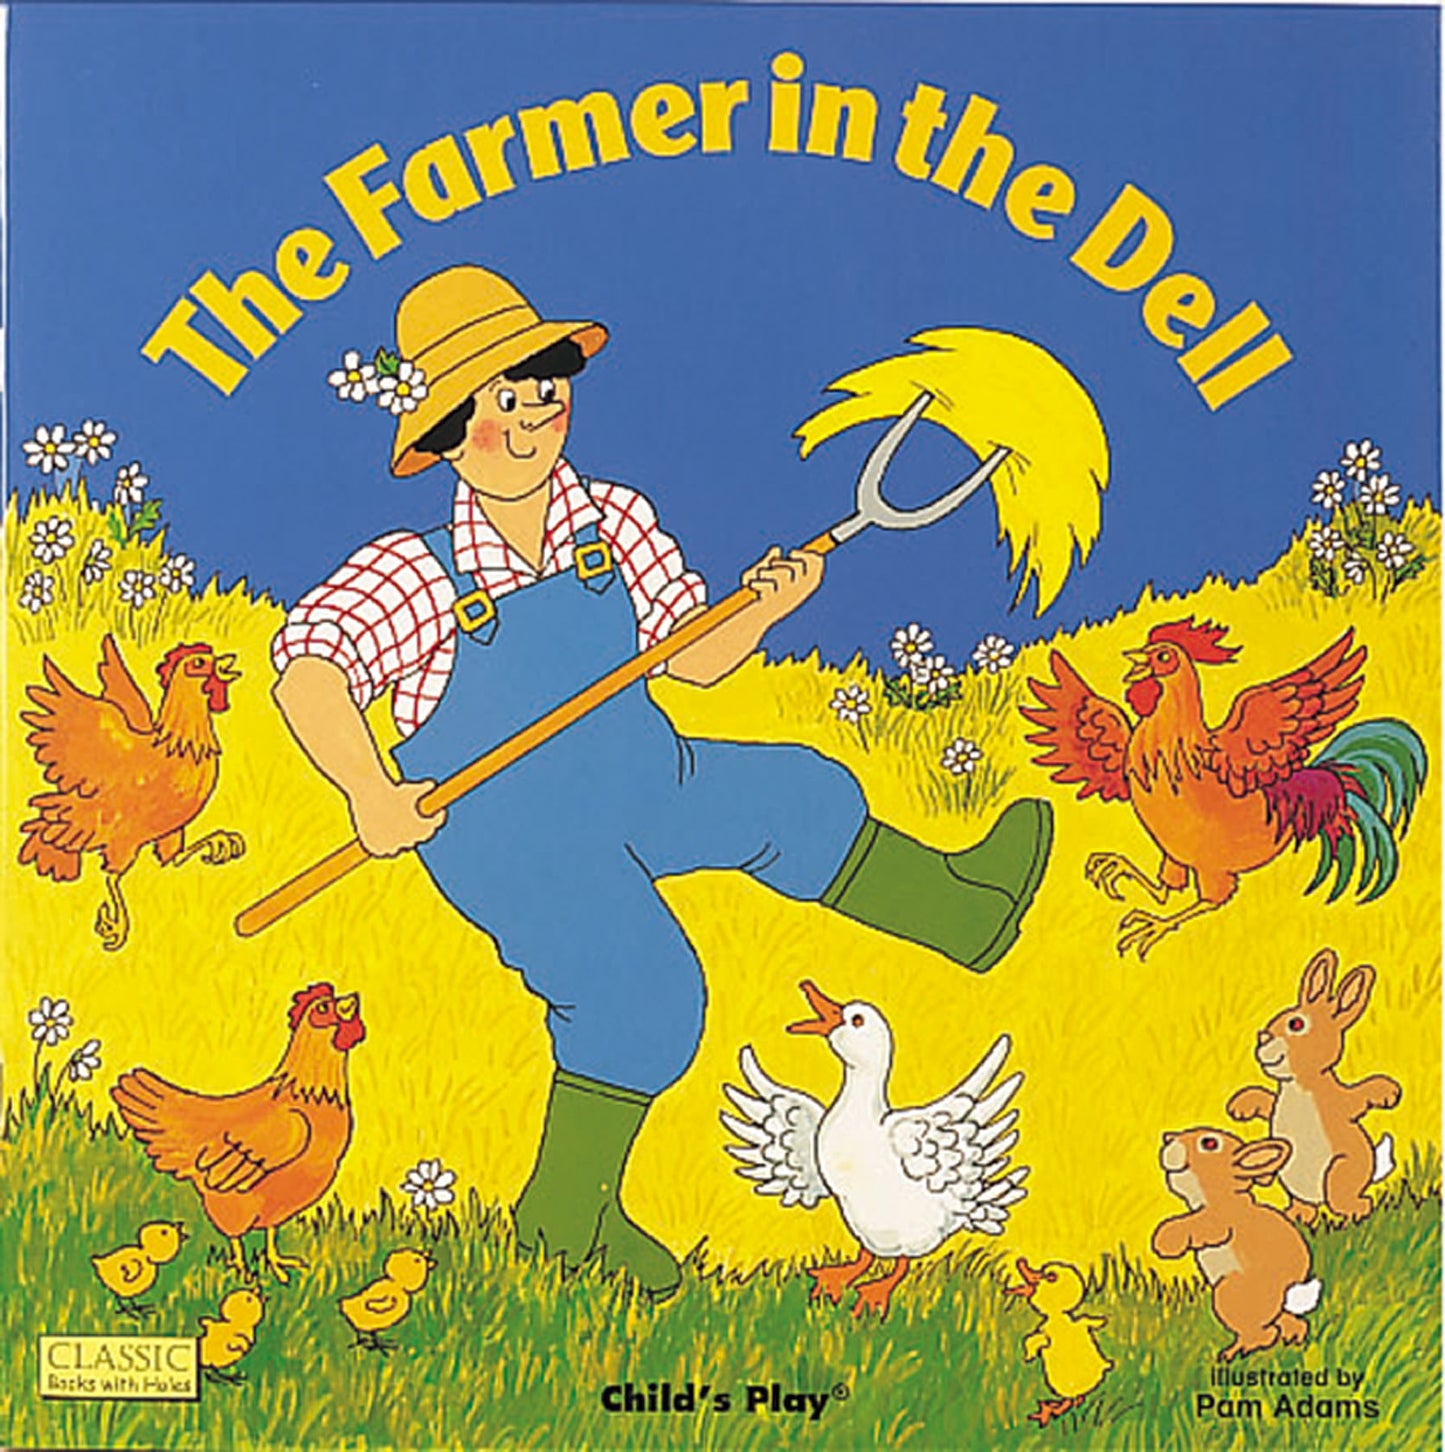 The Farmer in the Dell (8x8 Softcover Edition)